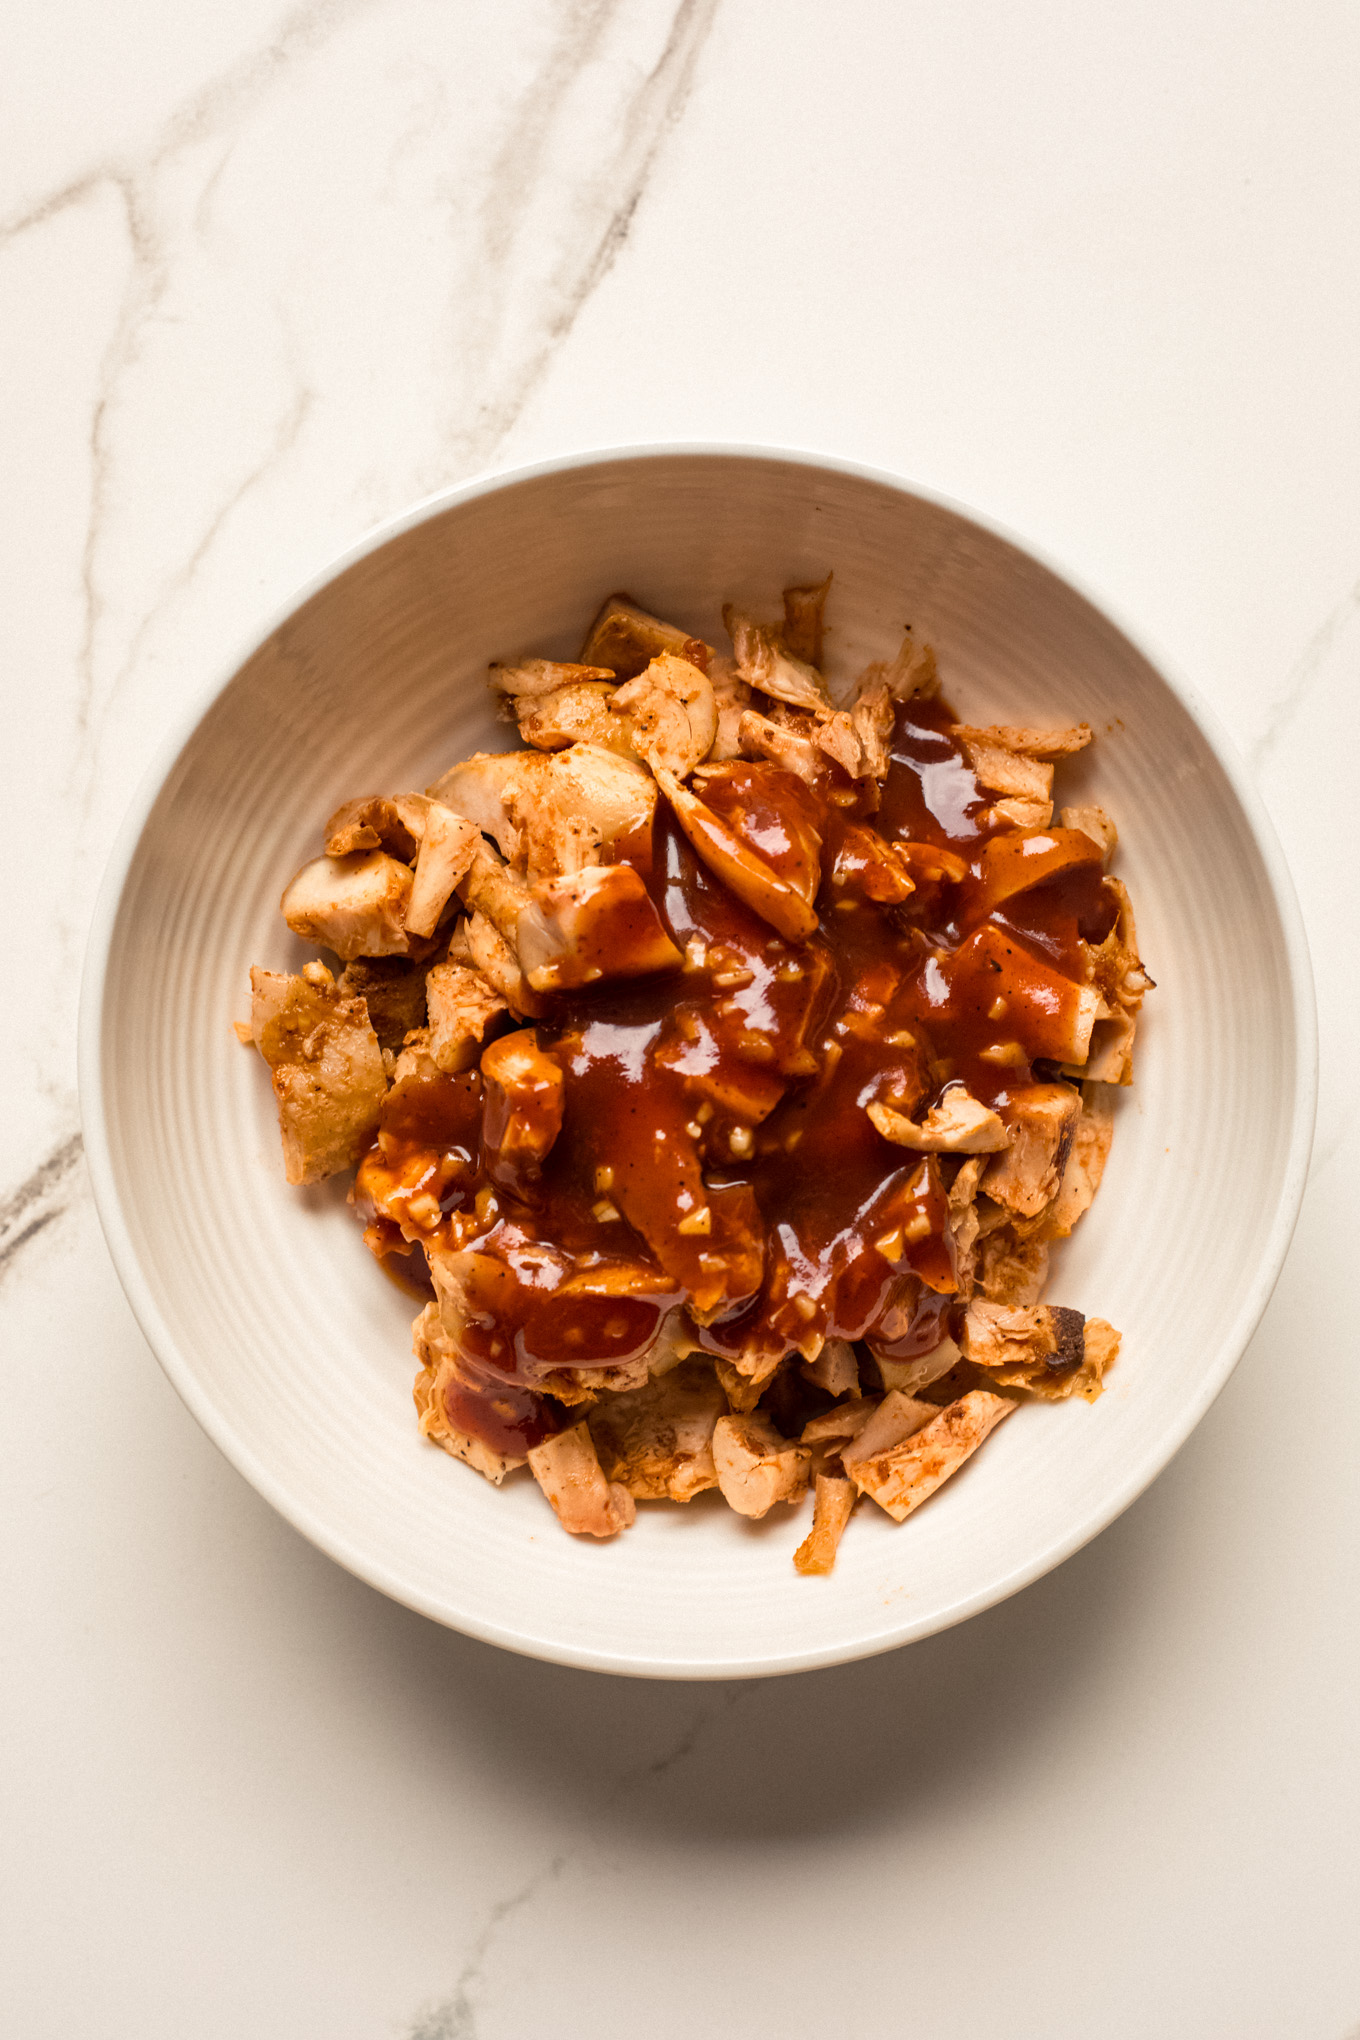 diced cooked chicken covered with bbq sauce.